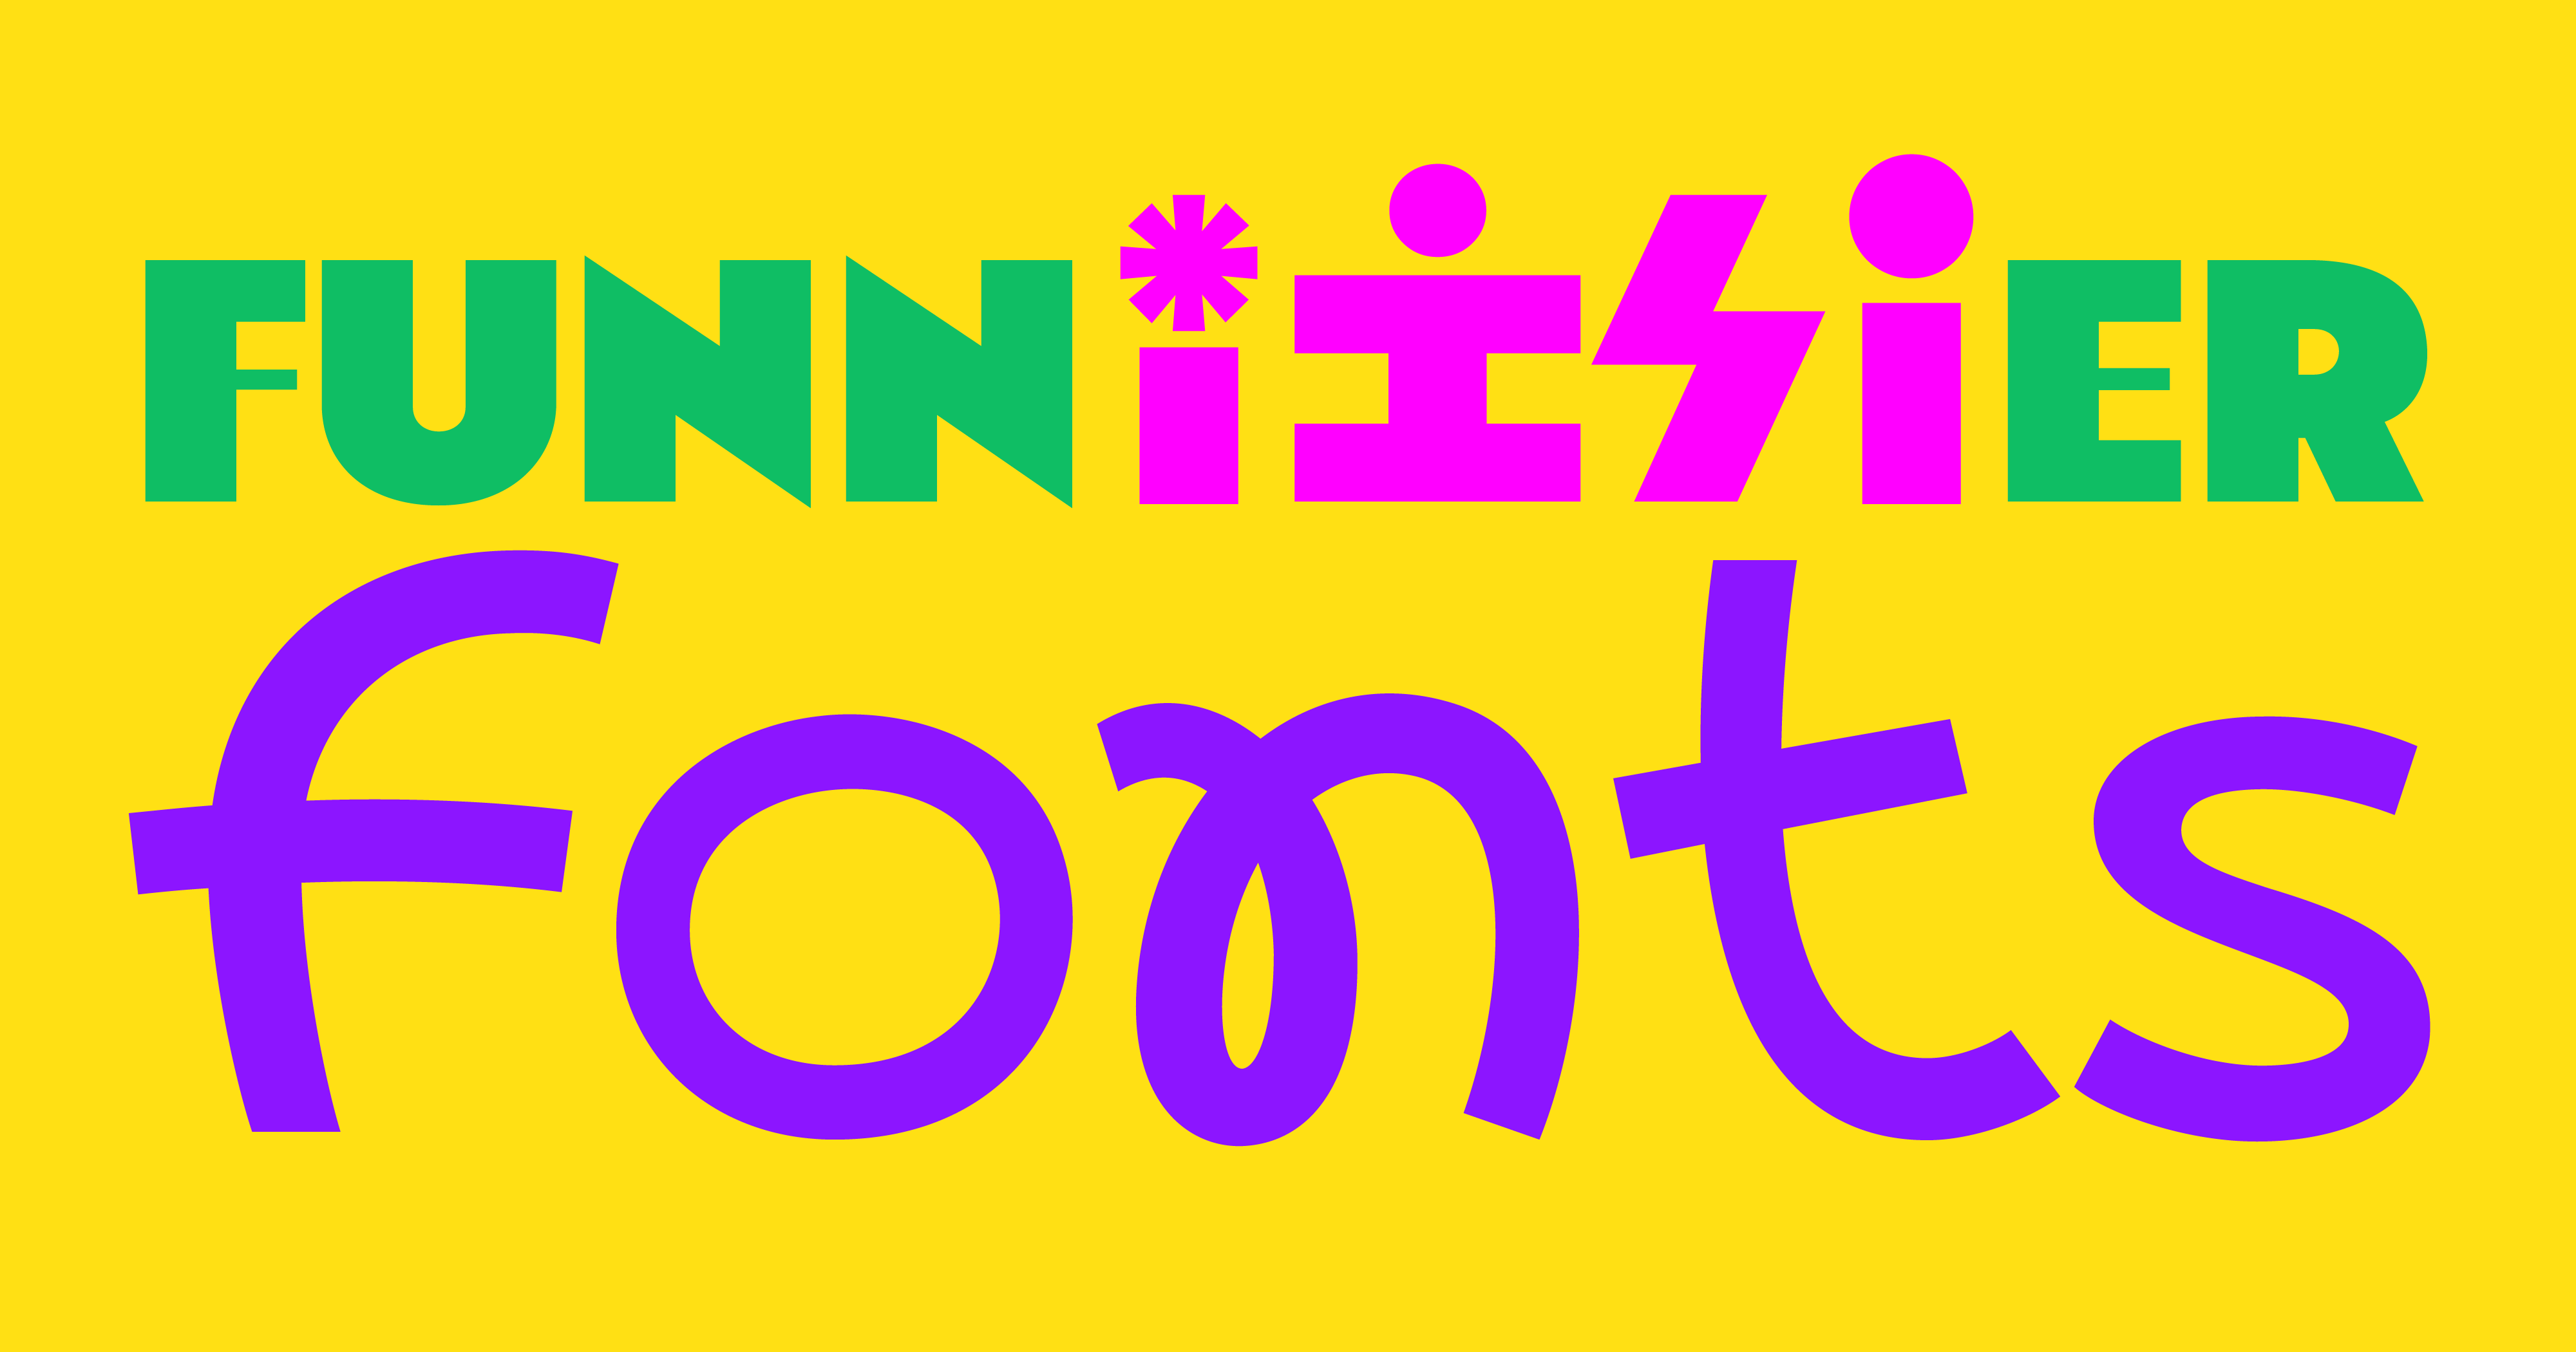 10 Fun fonts for creative projects with a happy personality